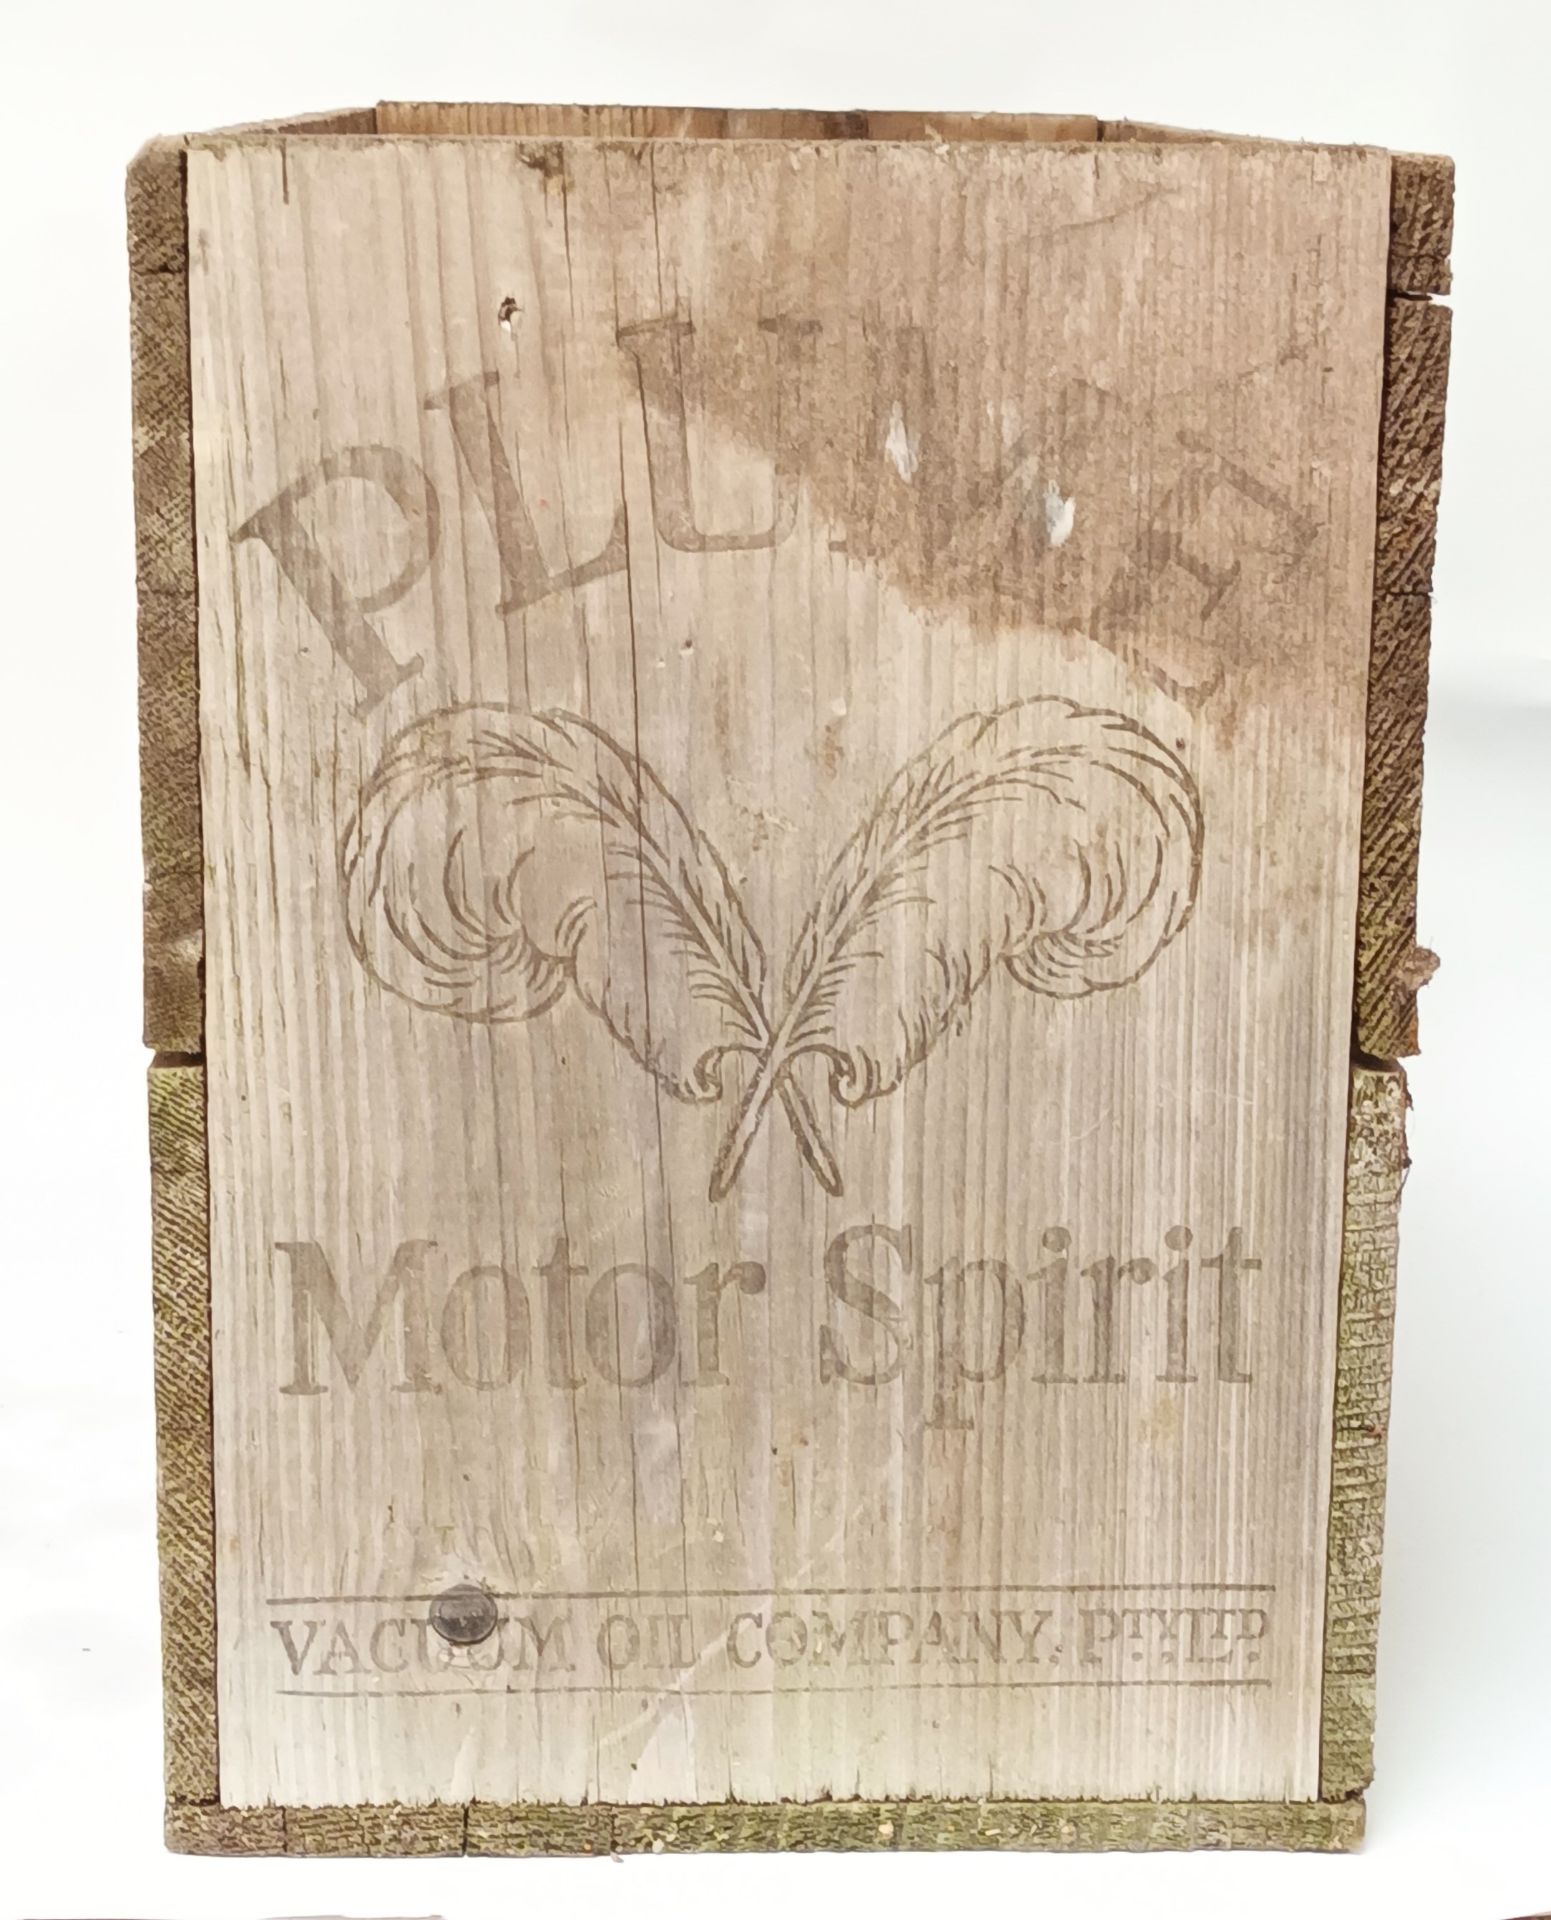 A New Zealand Vacuum Oil Company/Plume Motor Spirit wooden crate, 53 x 26 x 37cm - Image 3 of 4